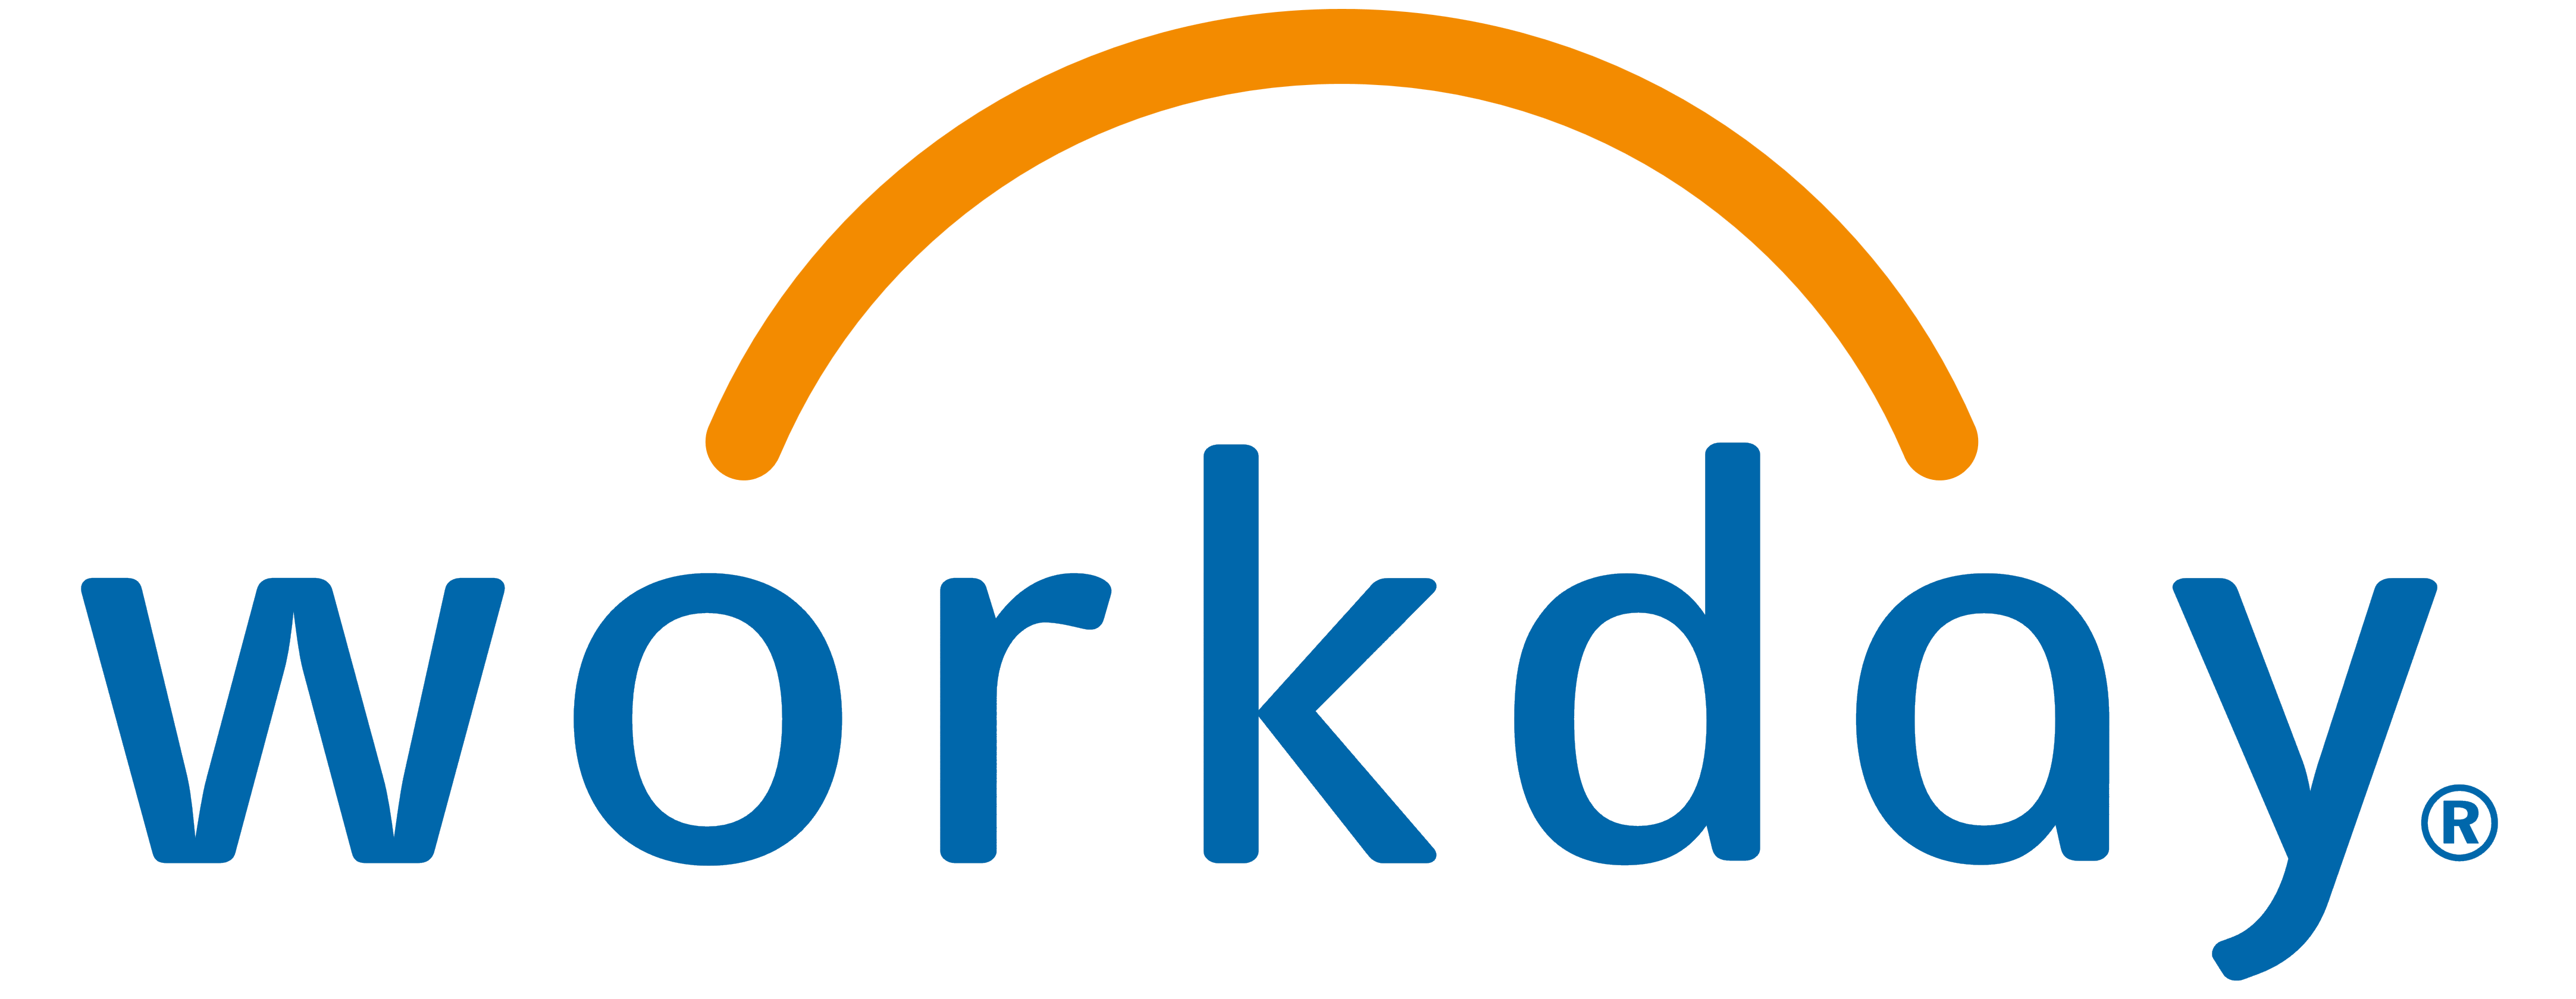 Workday Performance Marketing Results